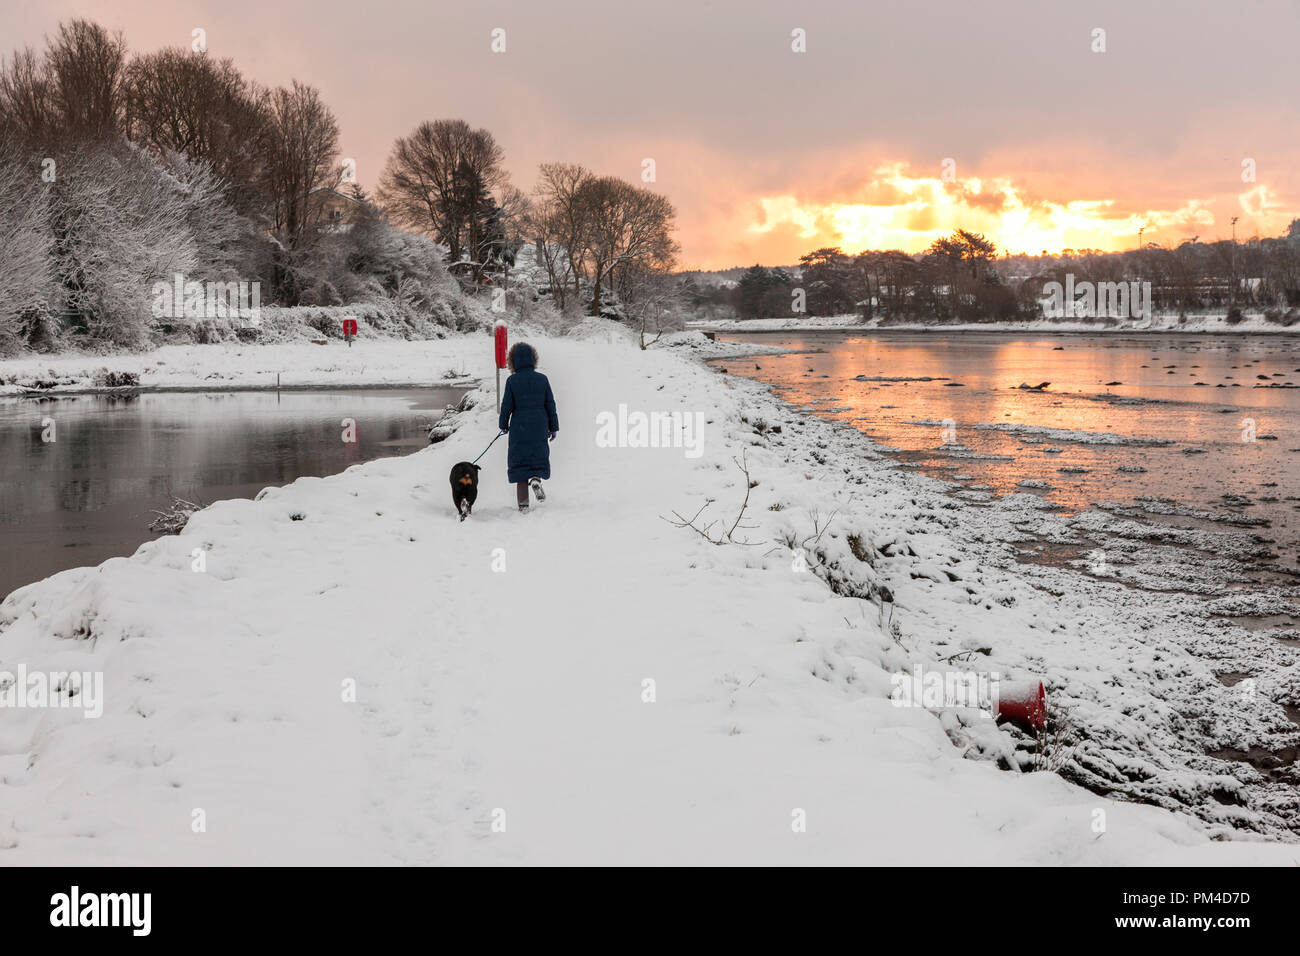 Carrigaline, Cork, Ireland. 28th February 2018. A woman walks her dog around the pond in the Community Park at dawn in Carrigaline Co. Cork, Ireland Stock Photo